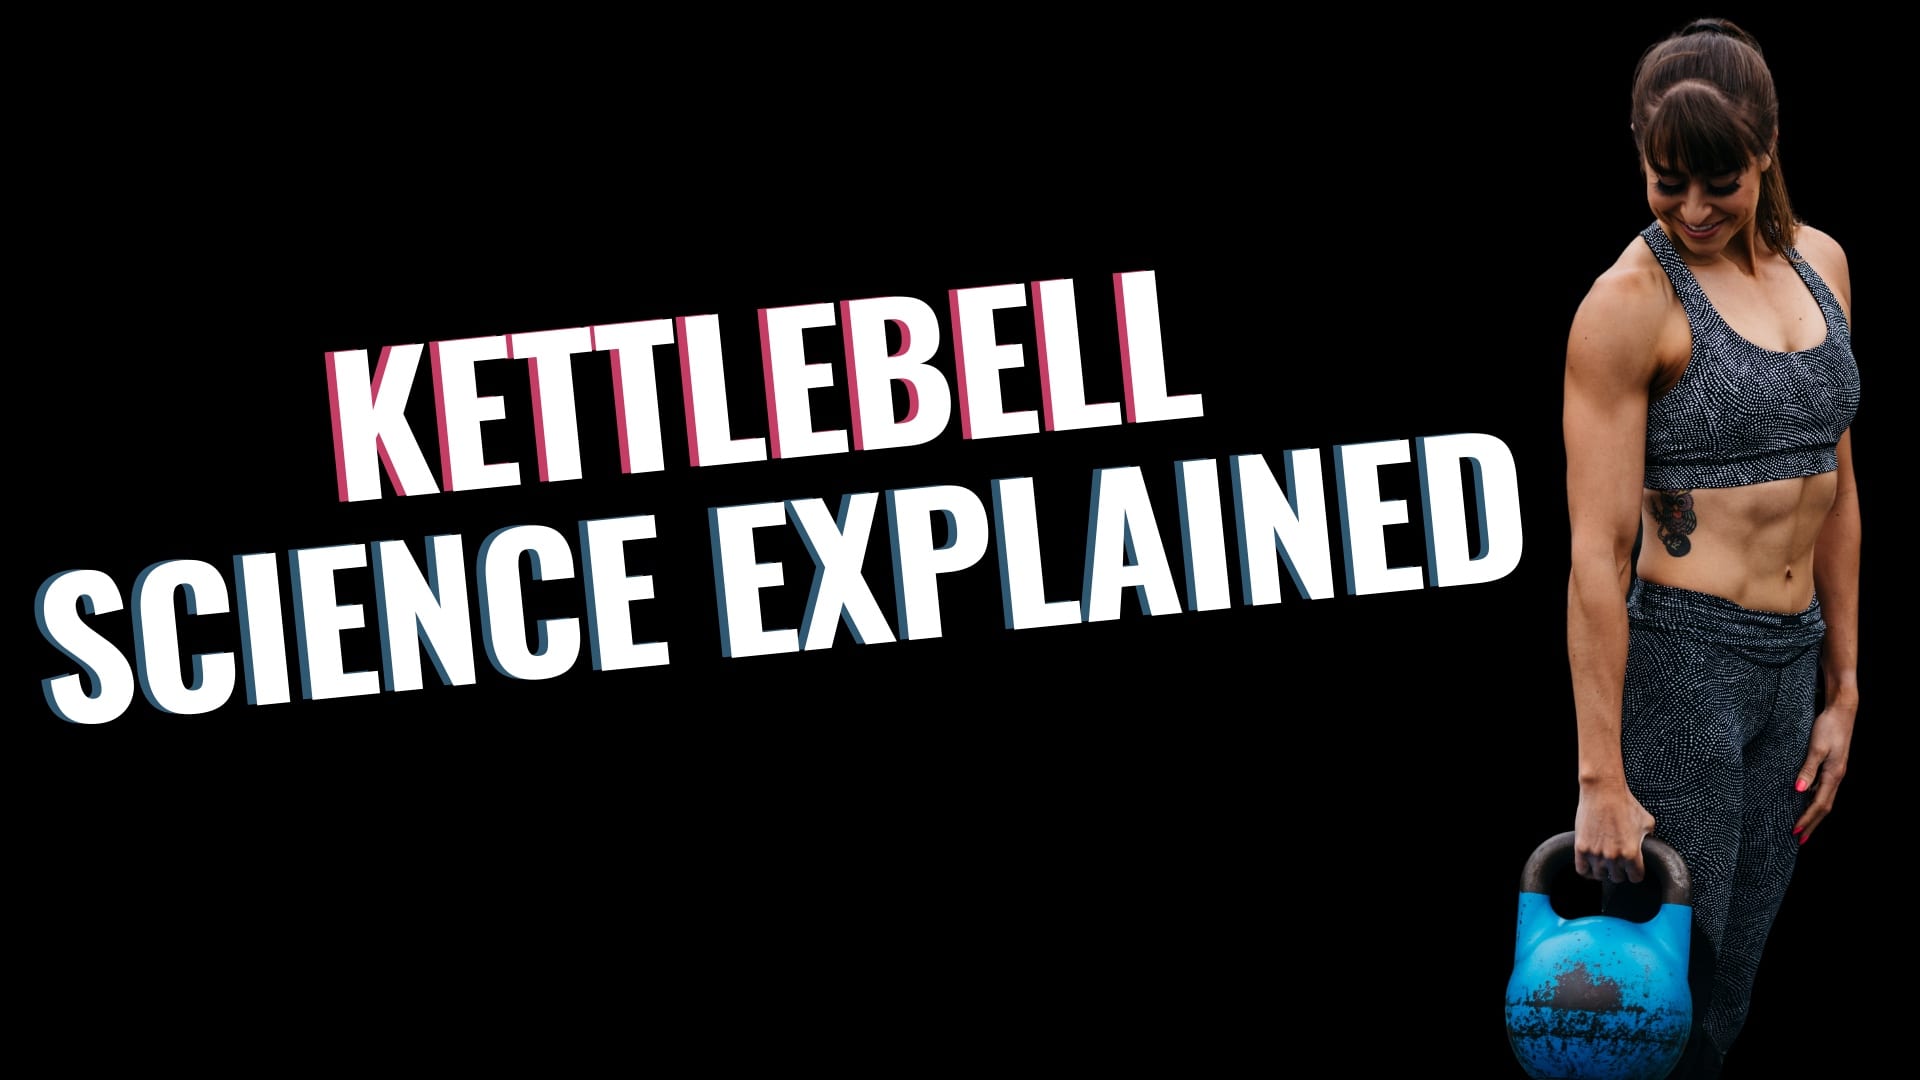 FHP S2:E2- The Fitness Hacks Podcast: The Science Behind Kettlebell Training